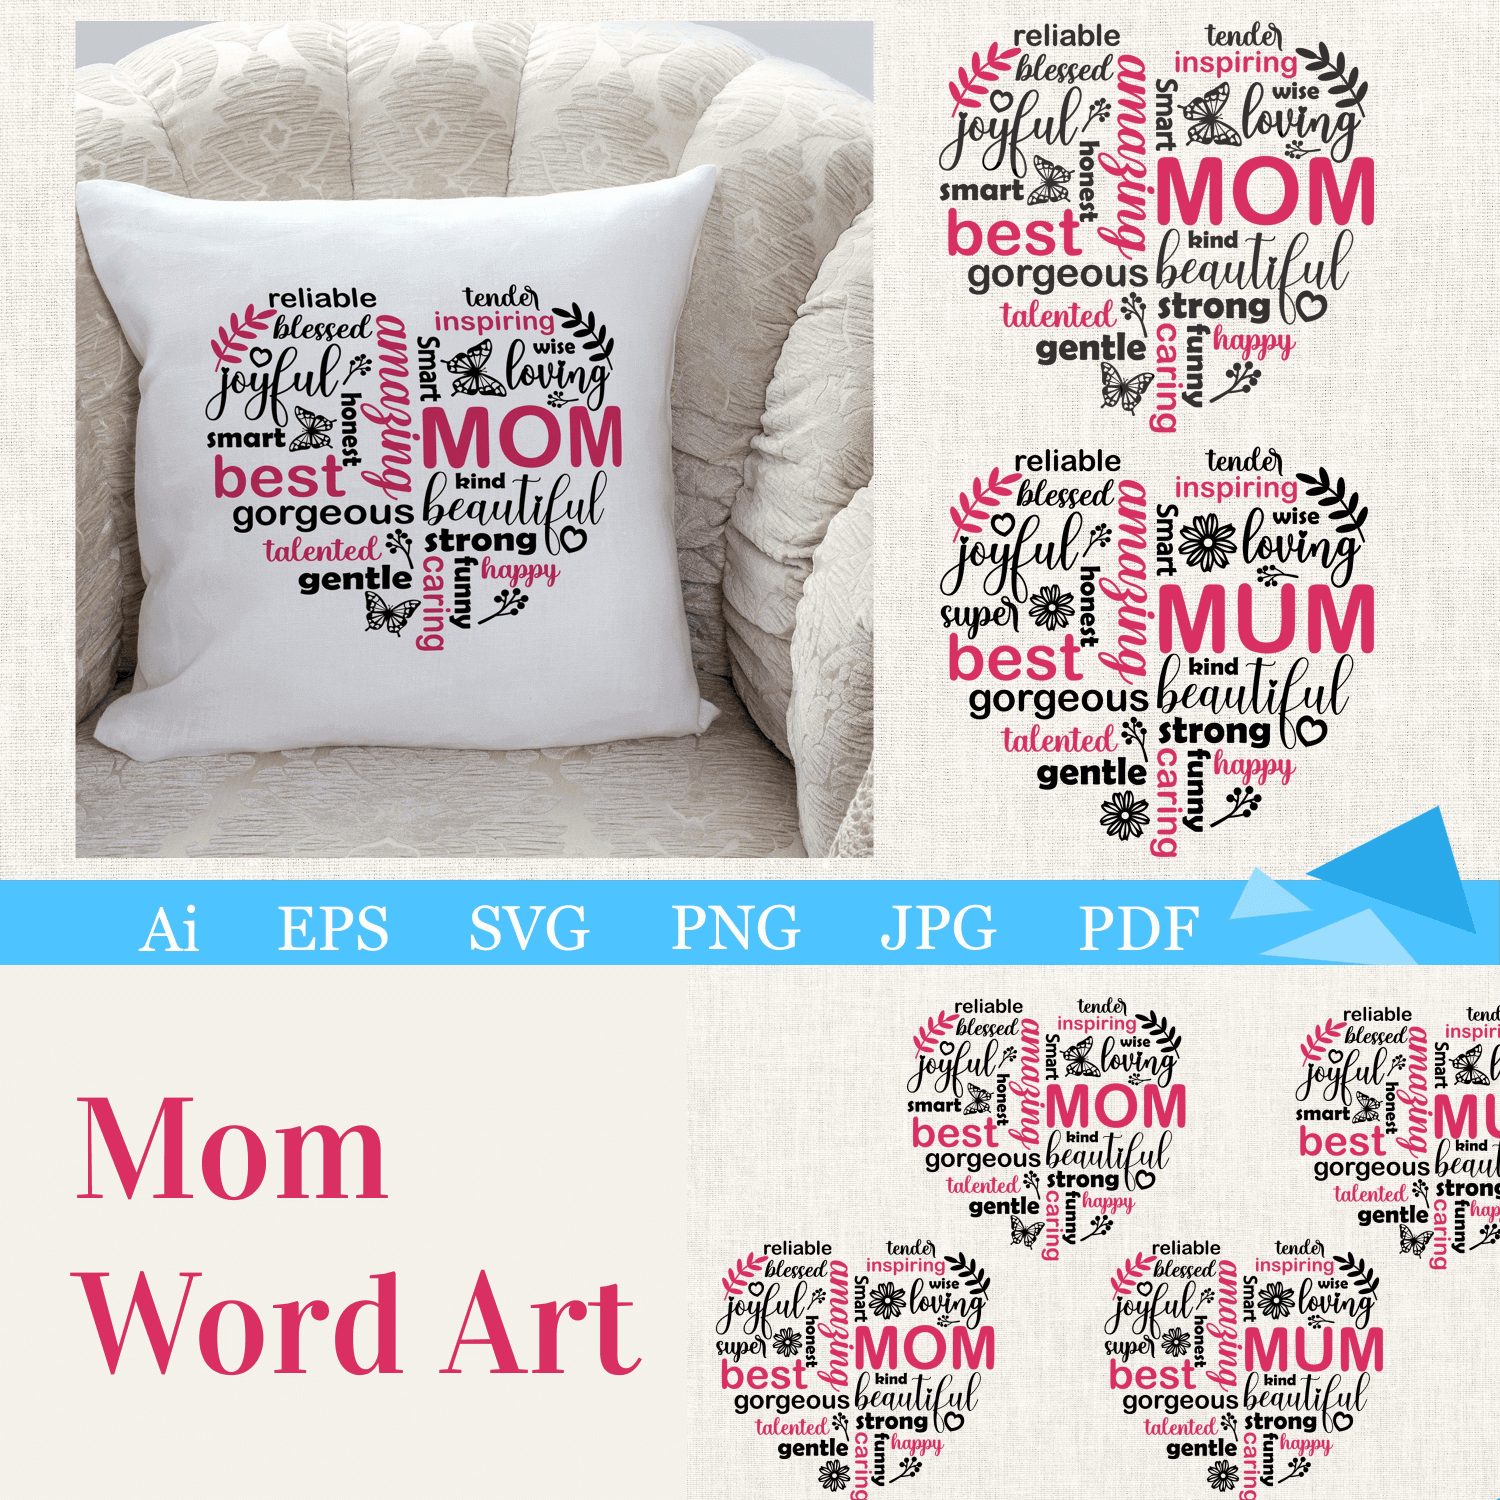 Mom Word Art on the Pillow.